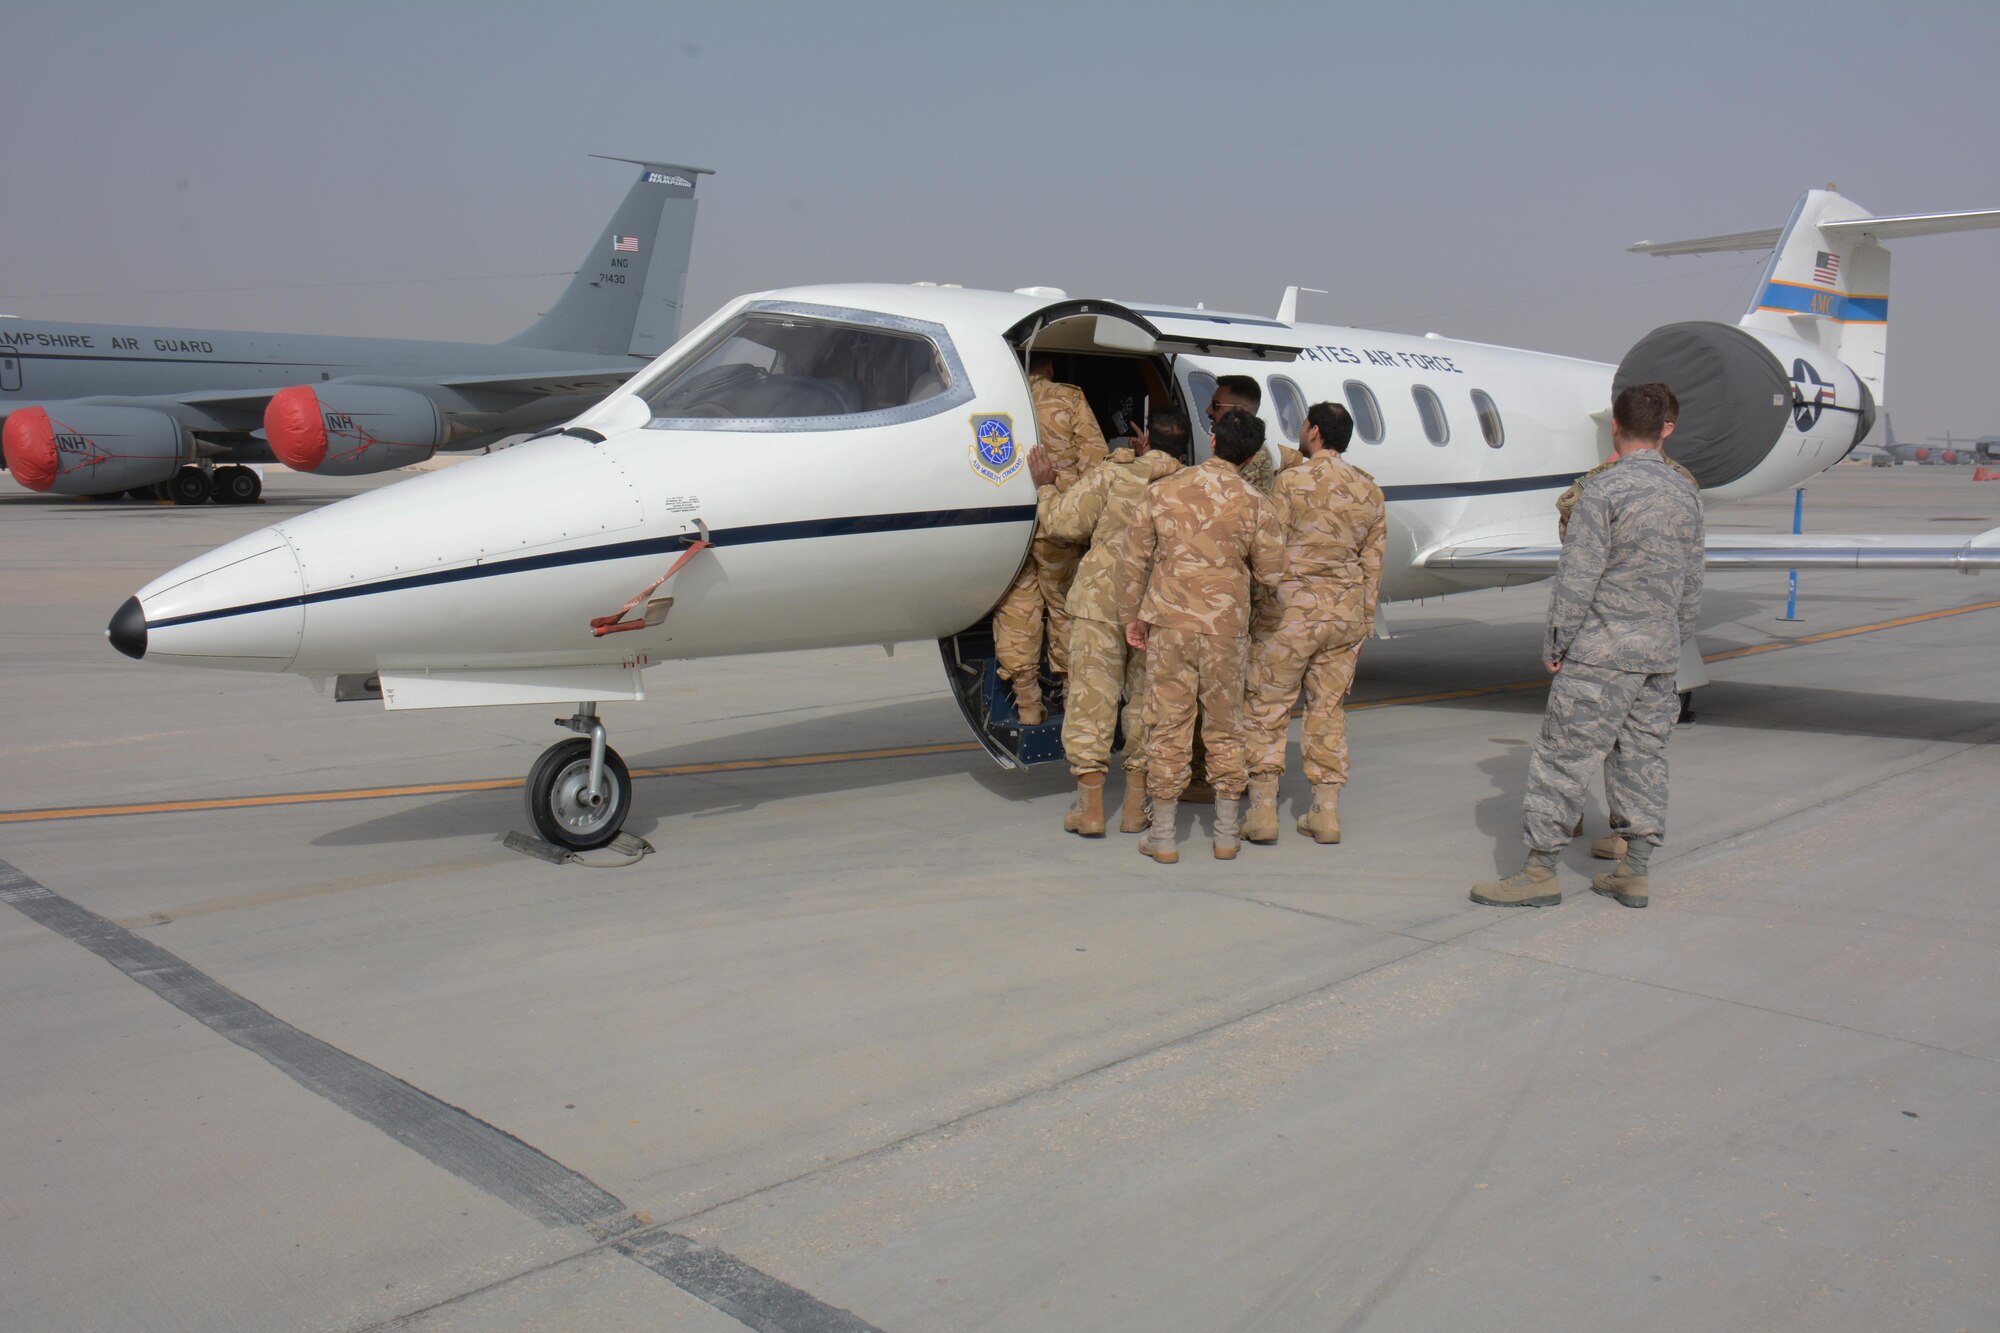 Several members of the Qatar Emiri Air Force tour a C-21 Learjet at the annual Flight Line Fest at Al Udeid Air Base, Qatar, Jan. 10. The aircraft joined eight others in the event, a joint partnership between the 379th Air Expeditionary Wing and QEAF held to foster relations between Qatar and the United States. (U.S. Air Force photo by Tech. Sgt. James Hodgman/Released)